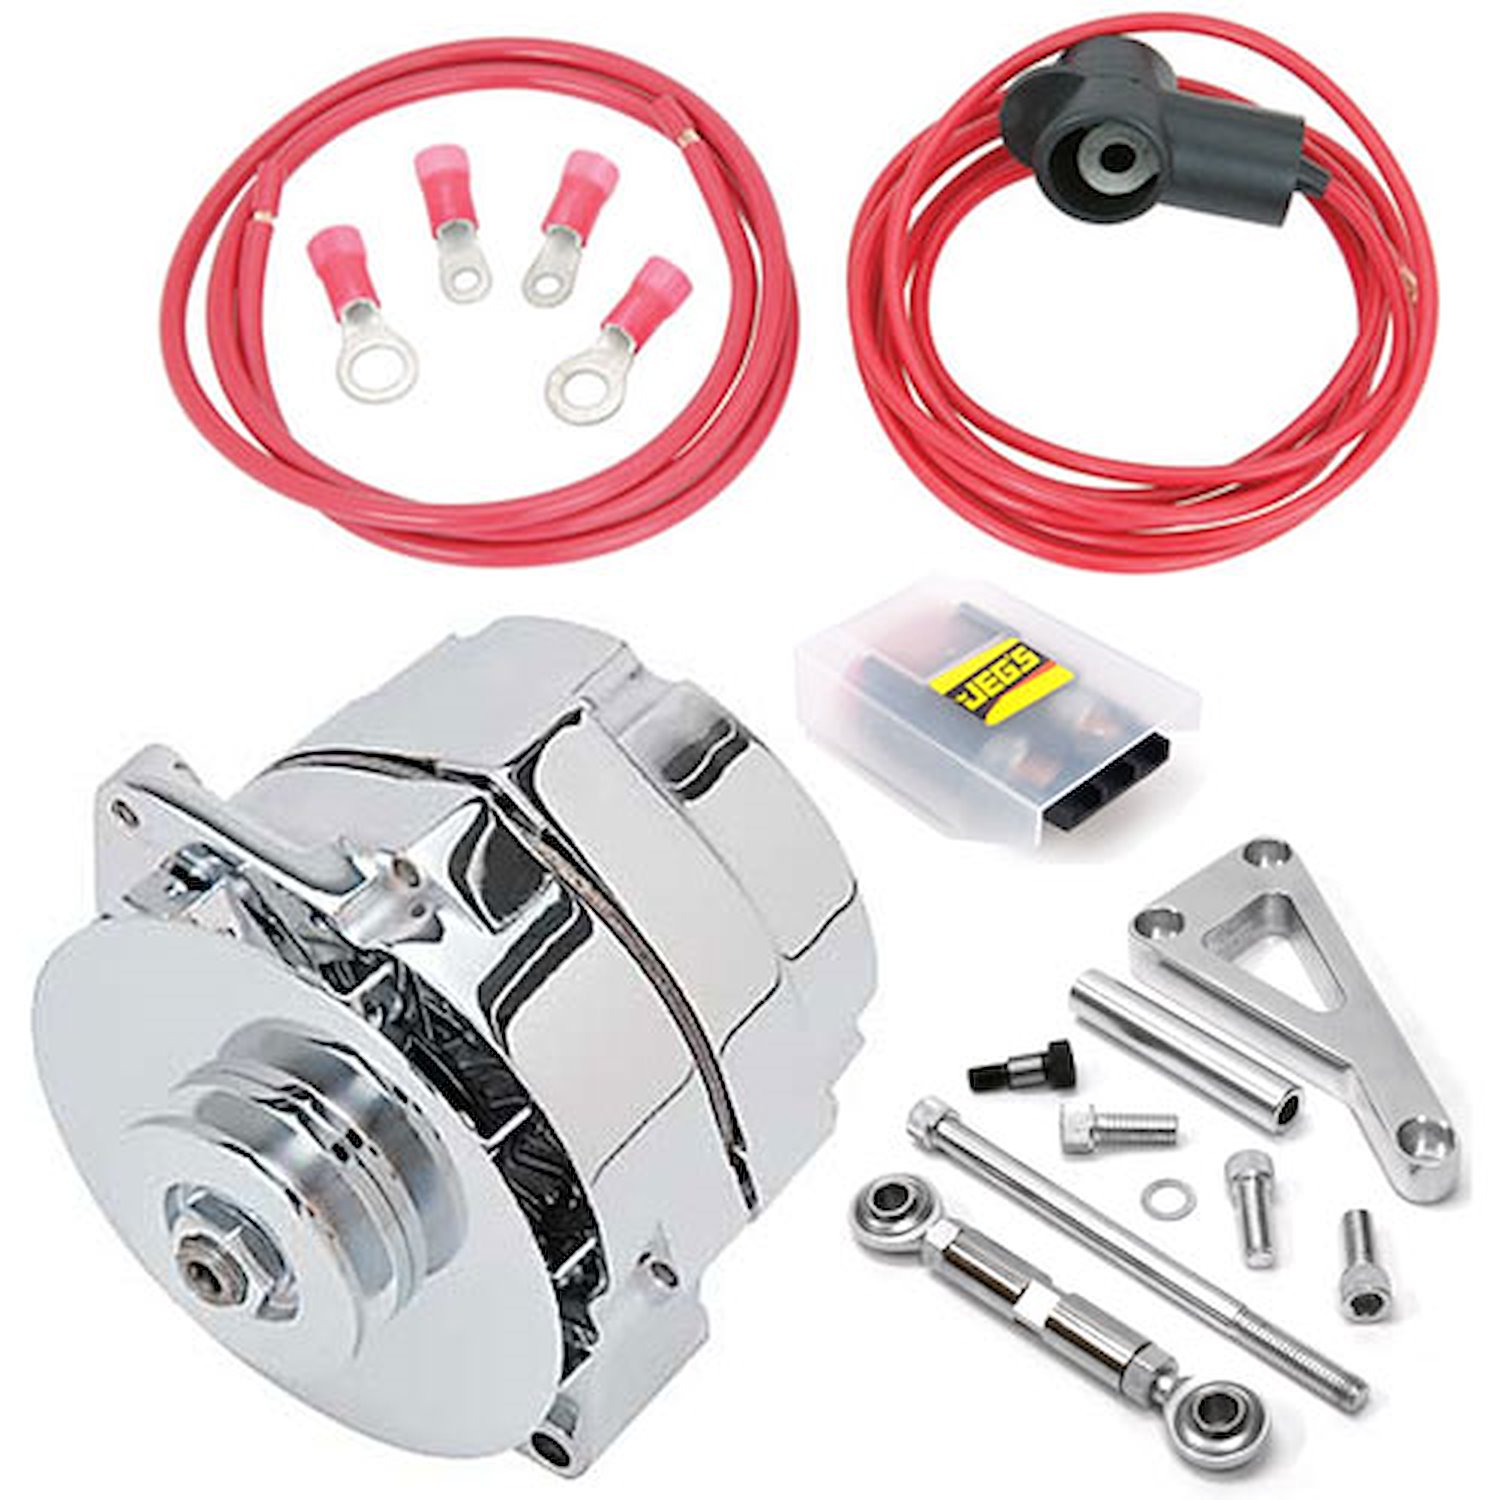 100 AMP Alternator Kit Small Block Chevy With Long Water Pump Includes: